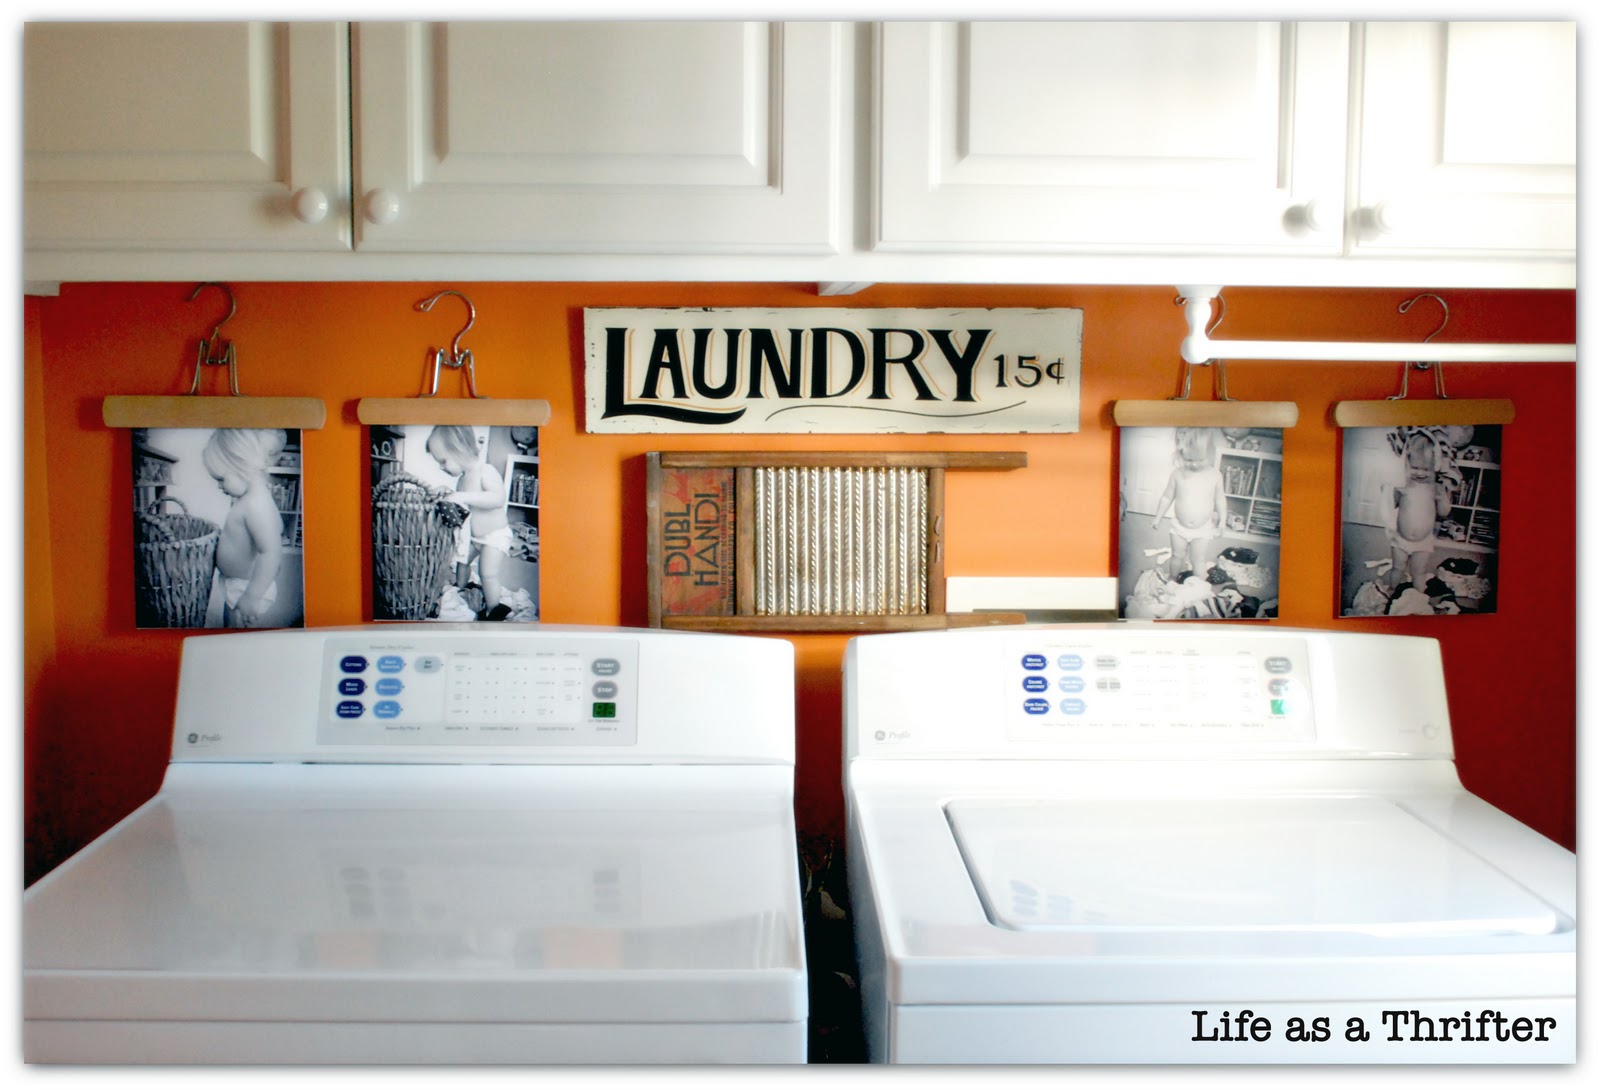 Life as a Thrifter: DIY Laundry Room Display